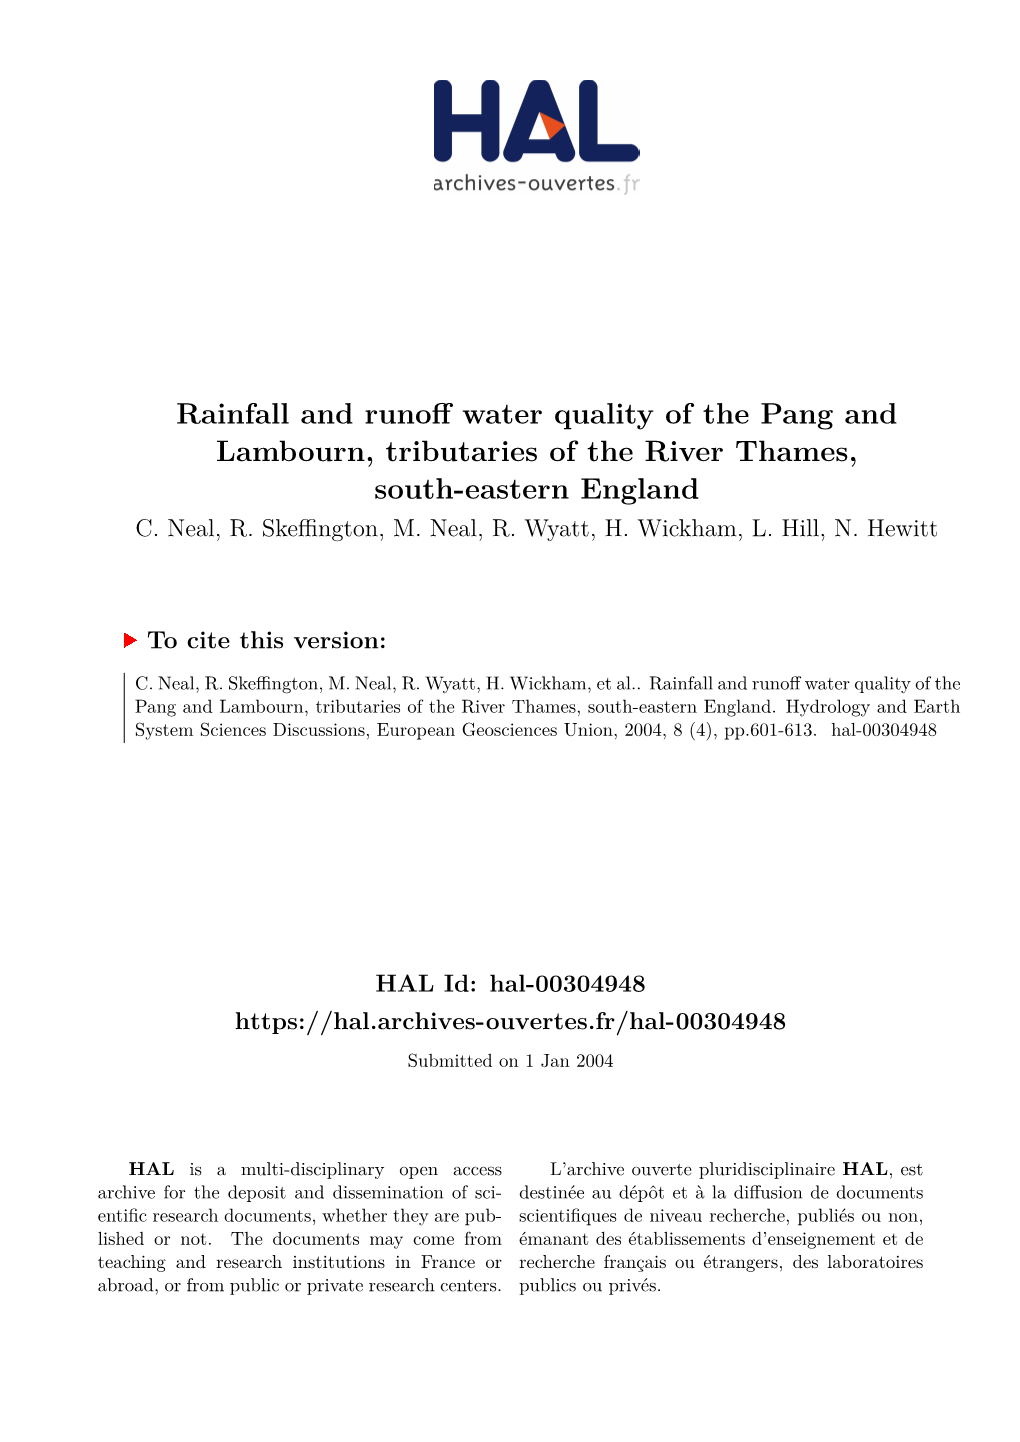 Rainfall and Runoff Water Quality of the Pang and Lambourn, Tributaries of the River Thames, South-Eastern England C